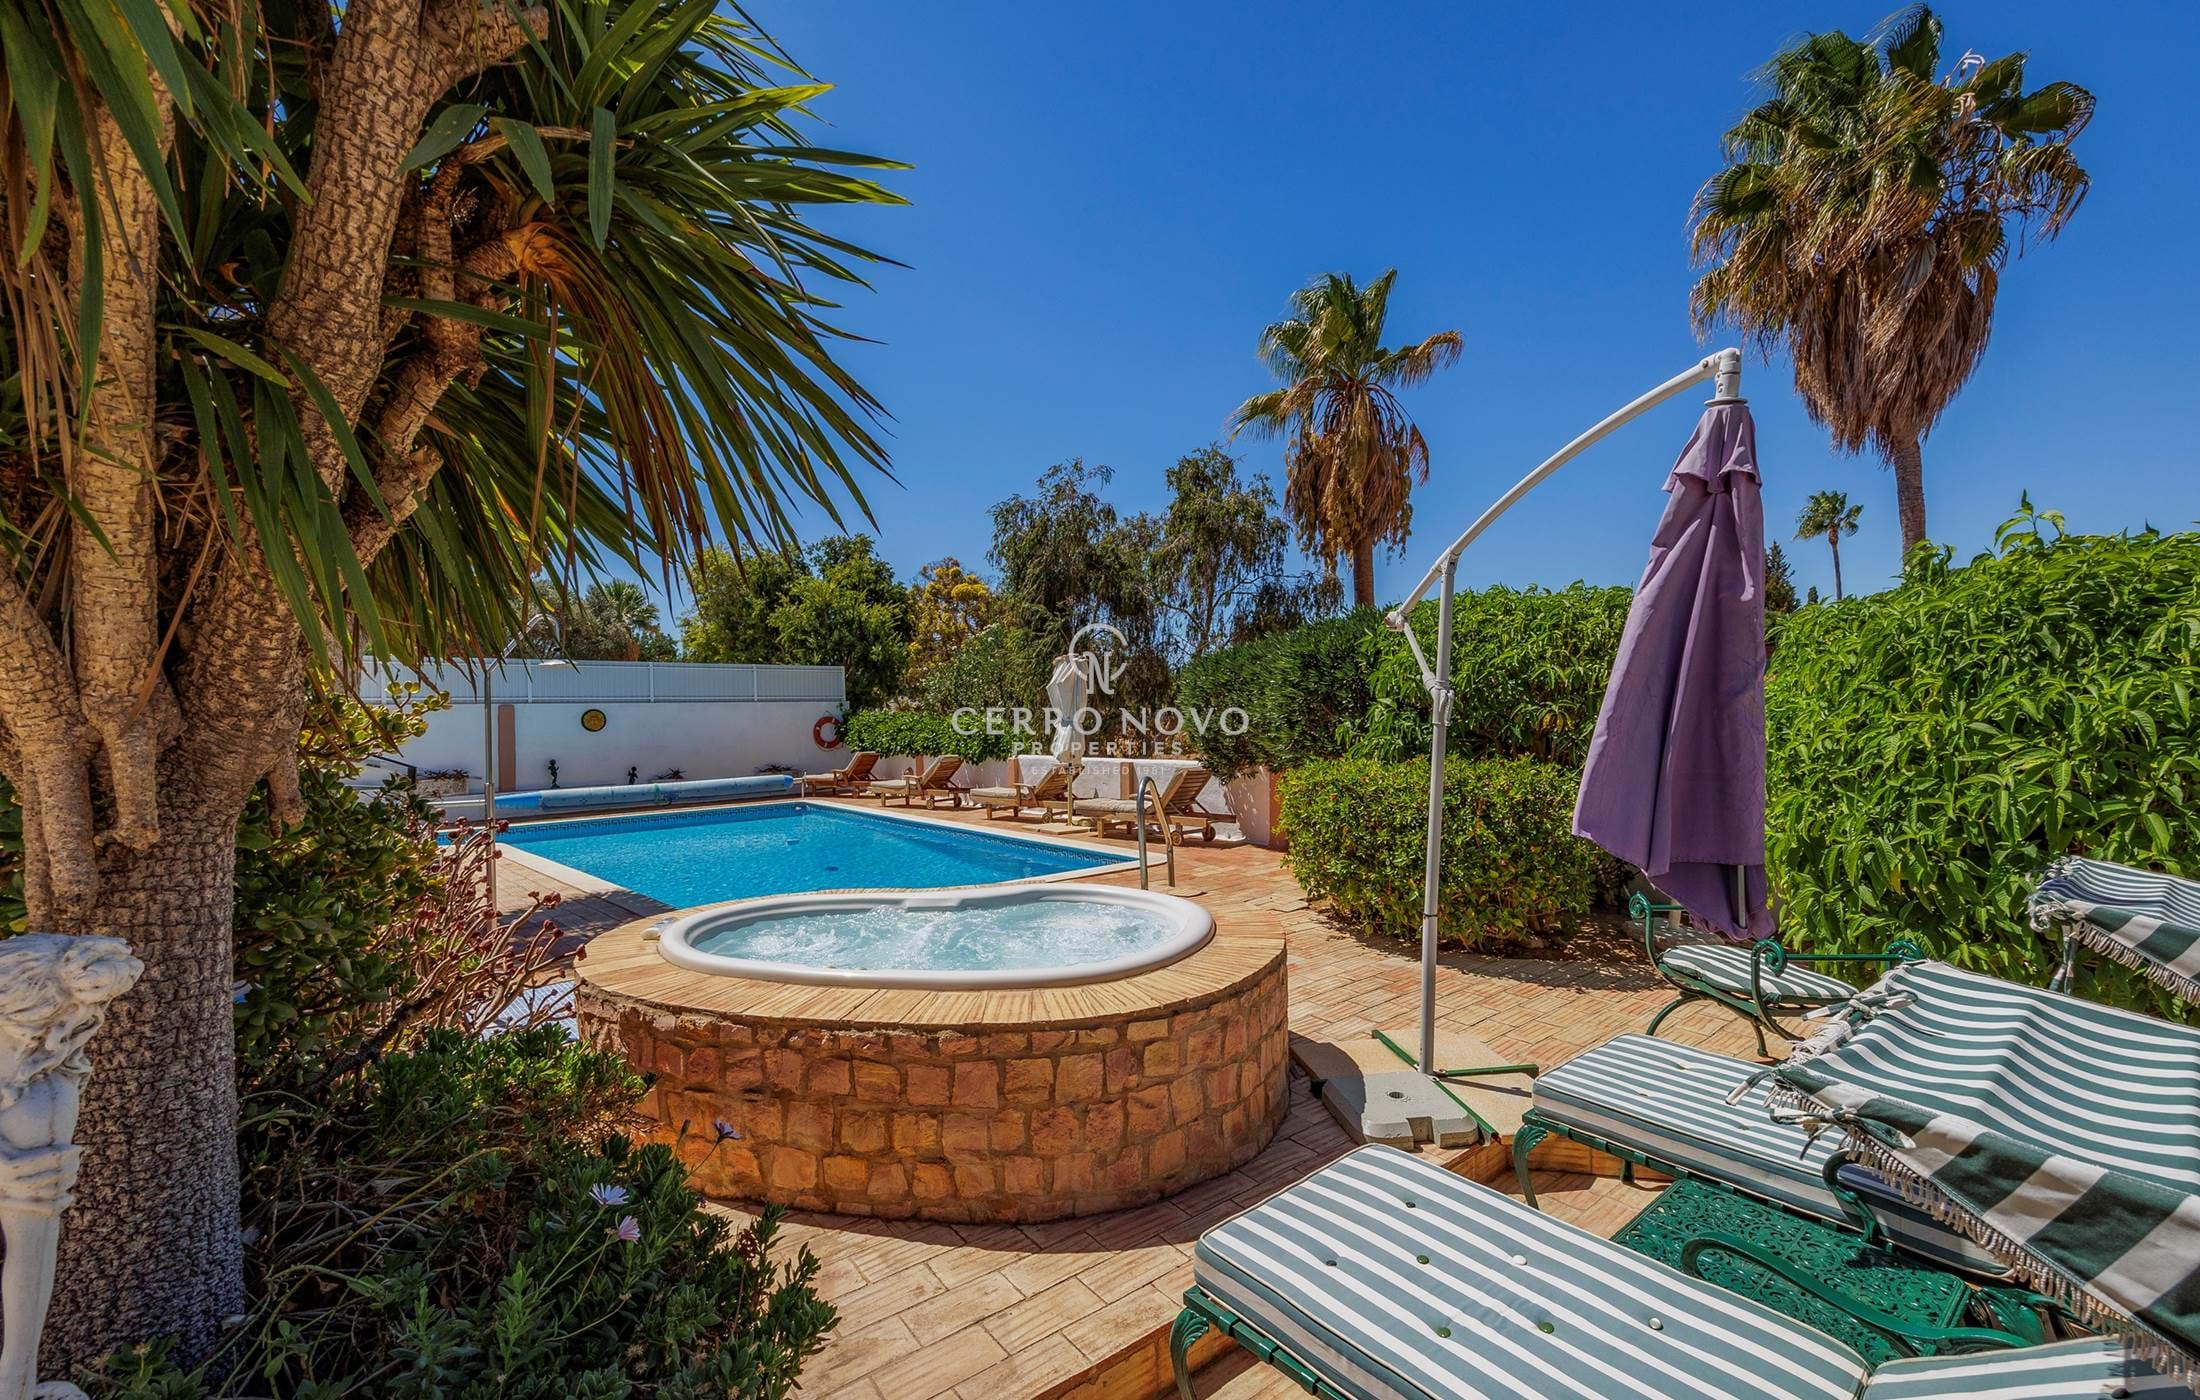 Superbly presented, large family home with pool and garden in an enviable location